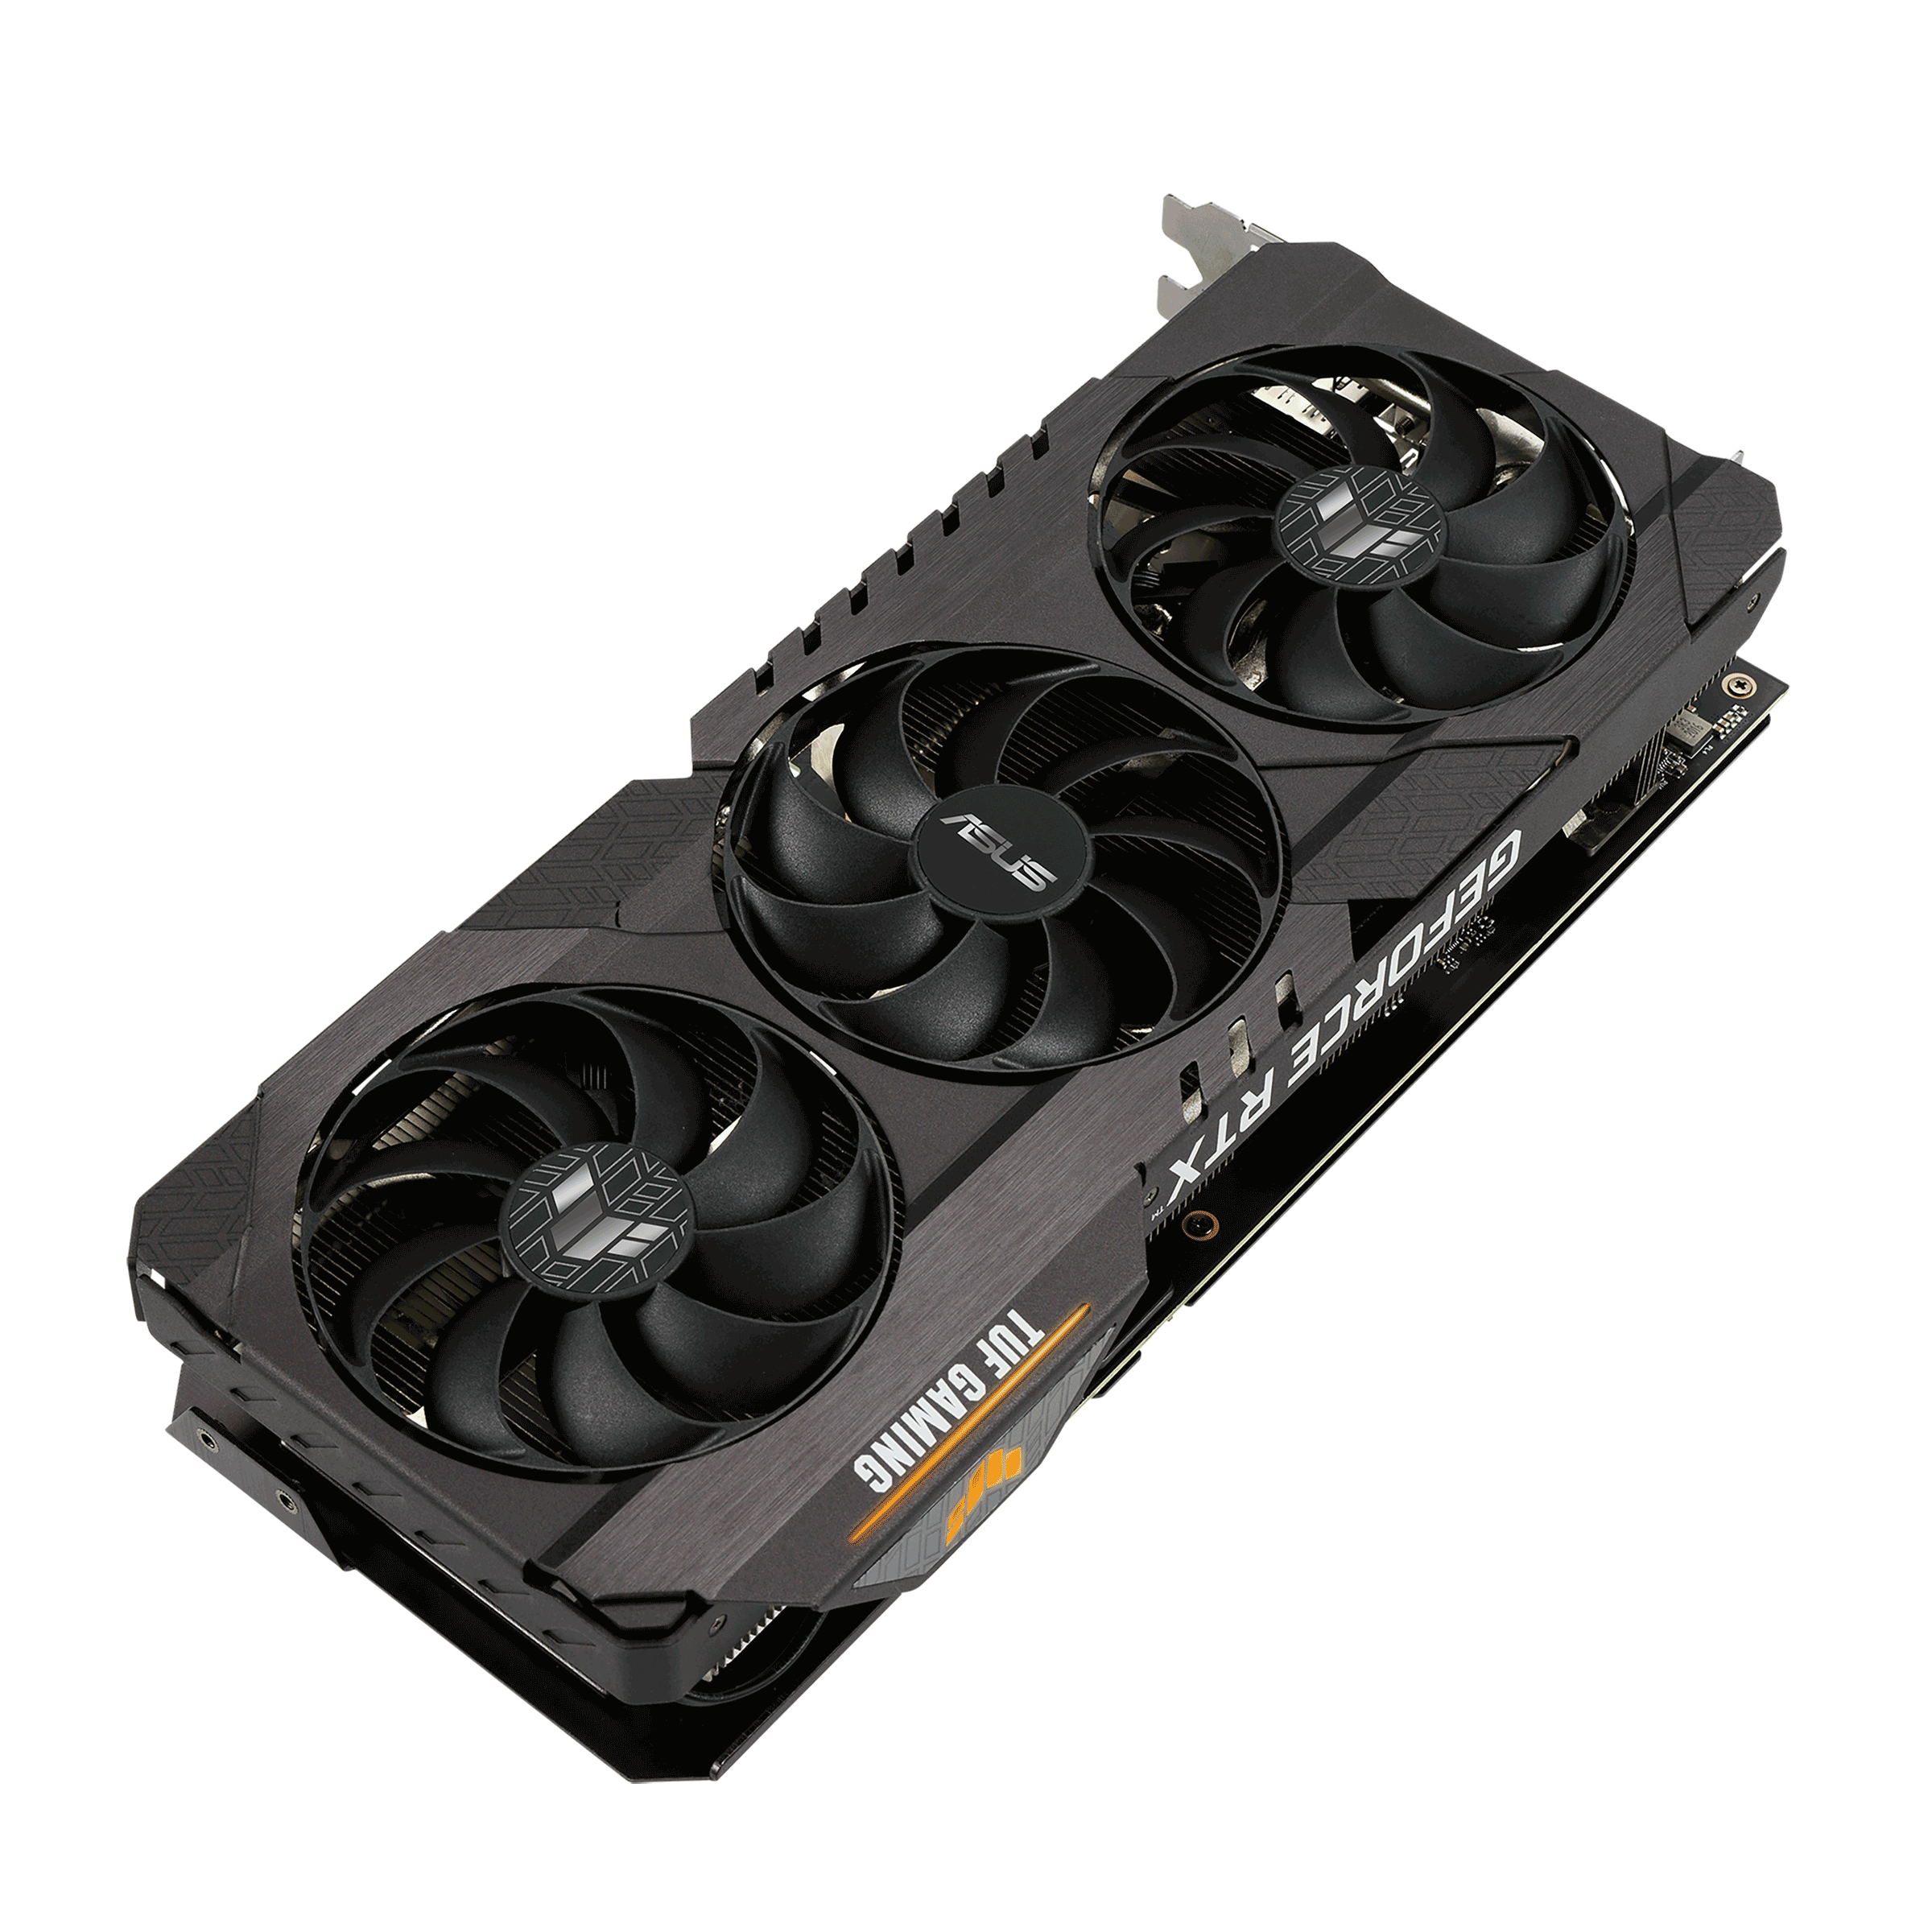 TUF-RTX3070-8G-GAMING｜Graphics Cards｜ASUS Global